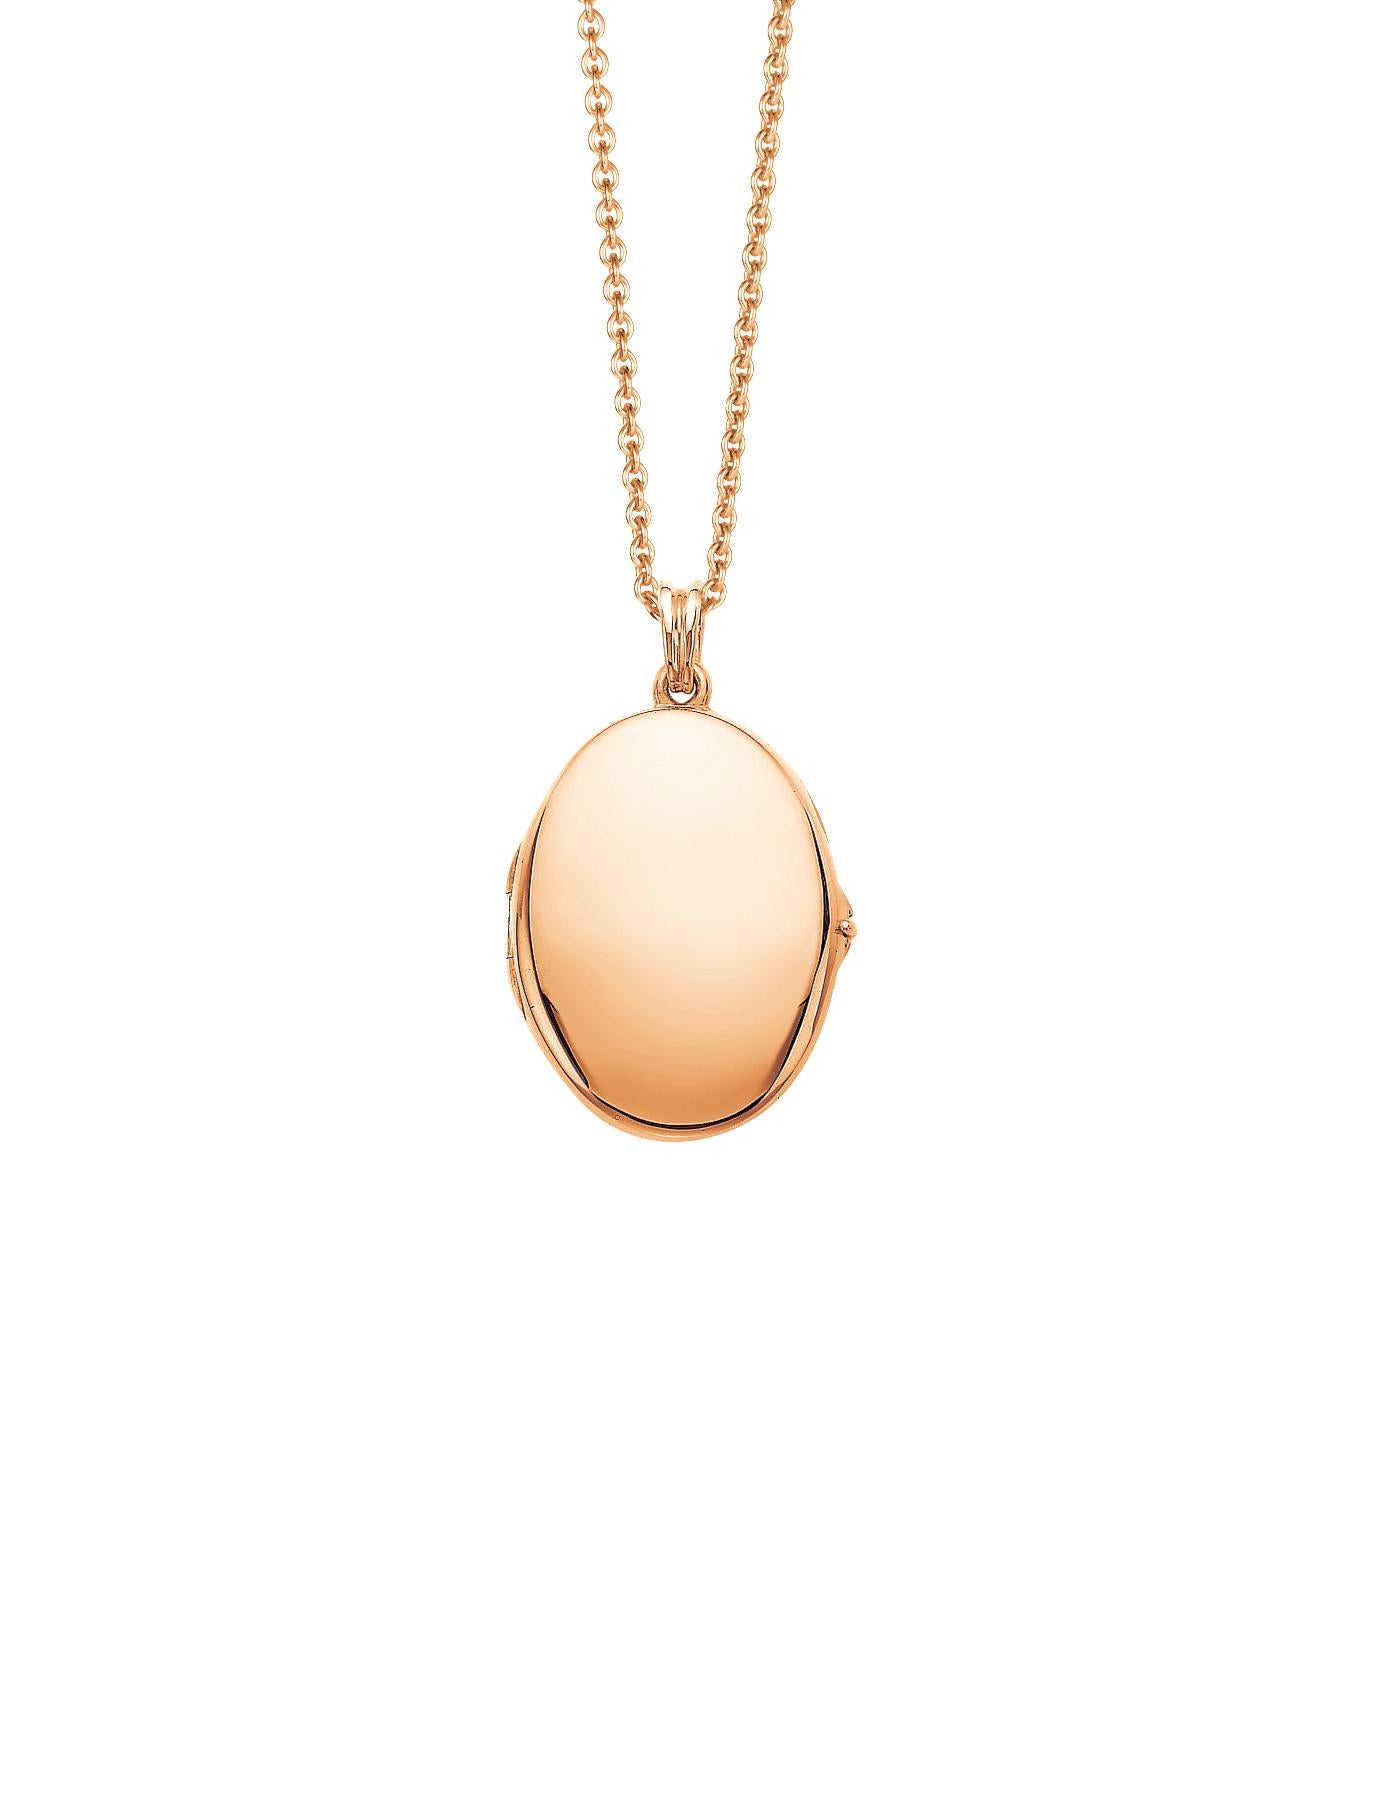 Victor Mayer customizable oval polished locket pendant necklace 18k rose gold, Hallmark collection, measurements app. 23.0 mm x 32.0 mm

About the creator Victor Mayer
Victor Mayer is internationally renowned for elegant timeless designs and